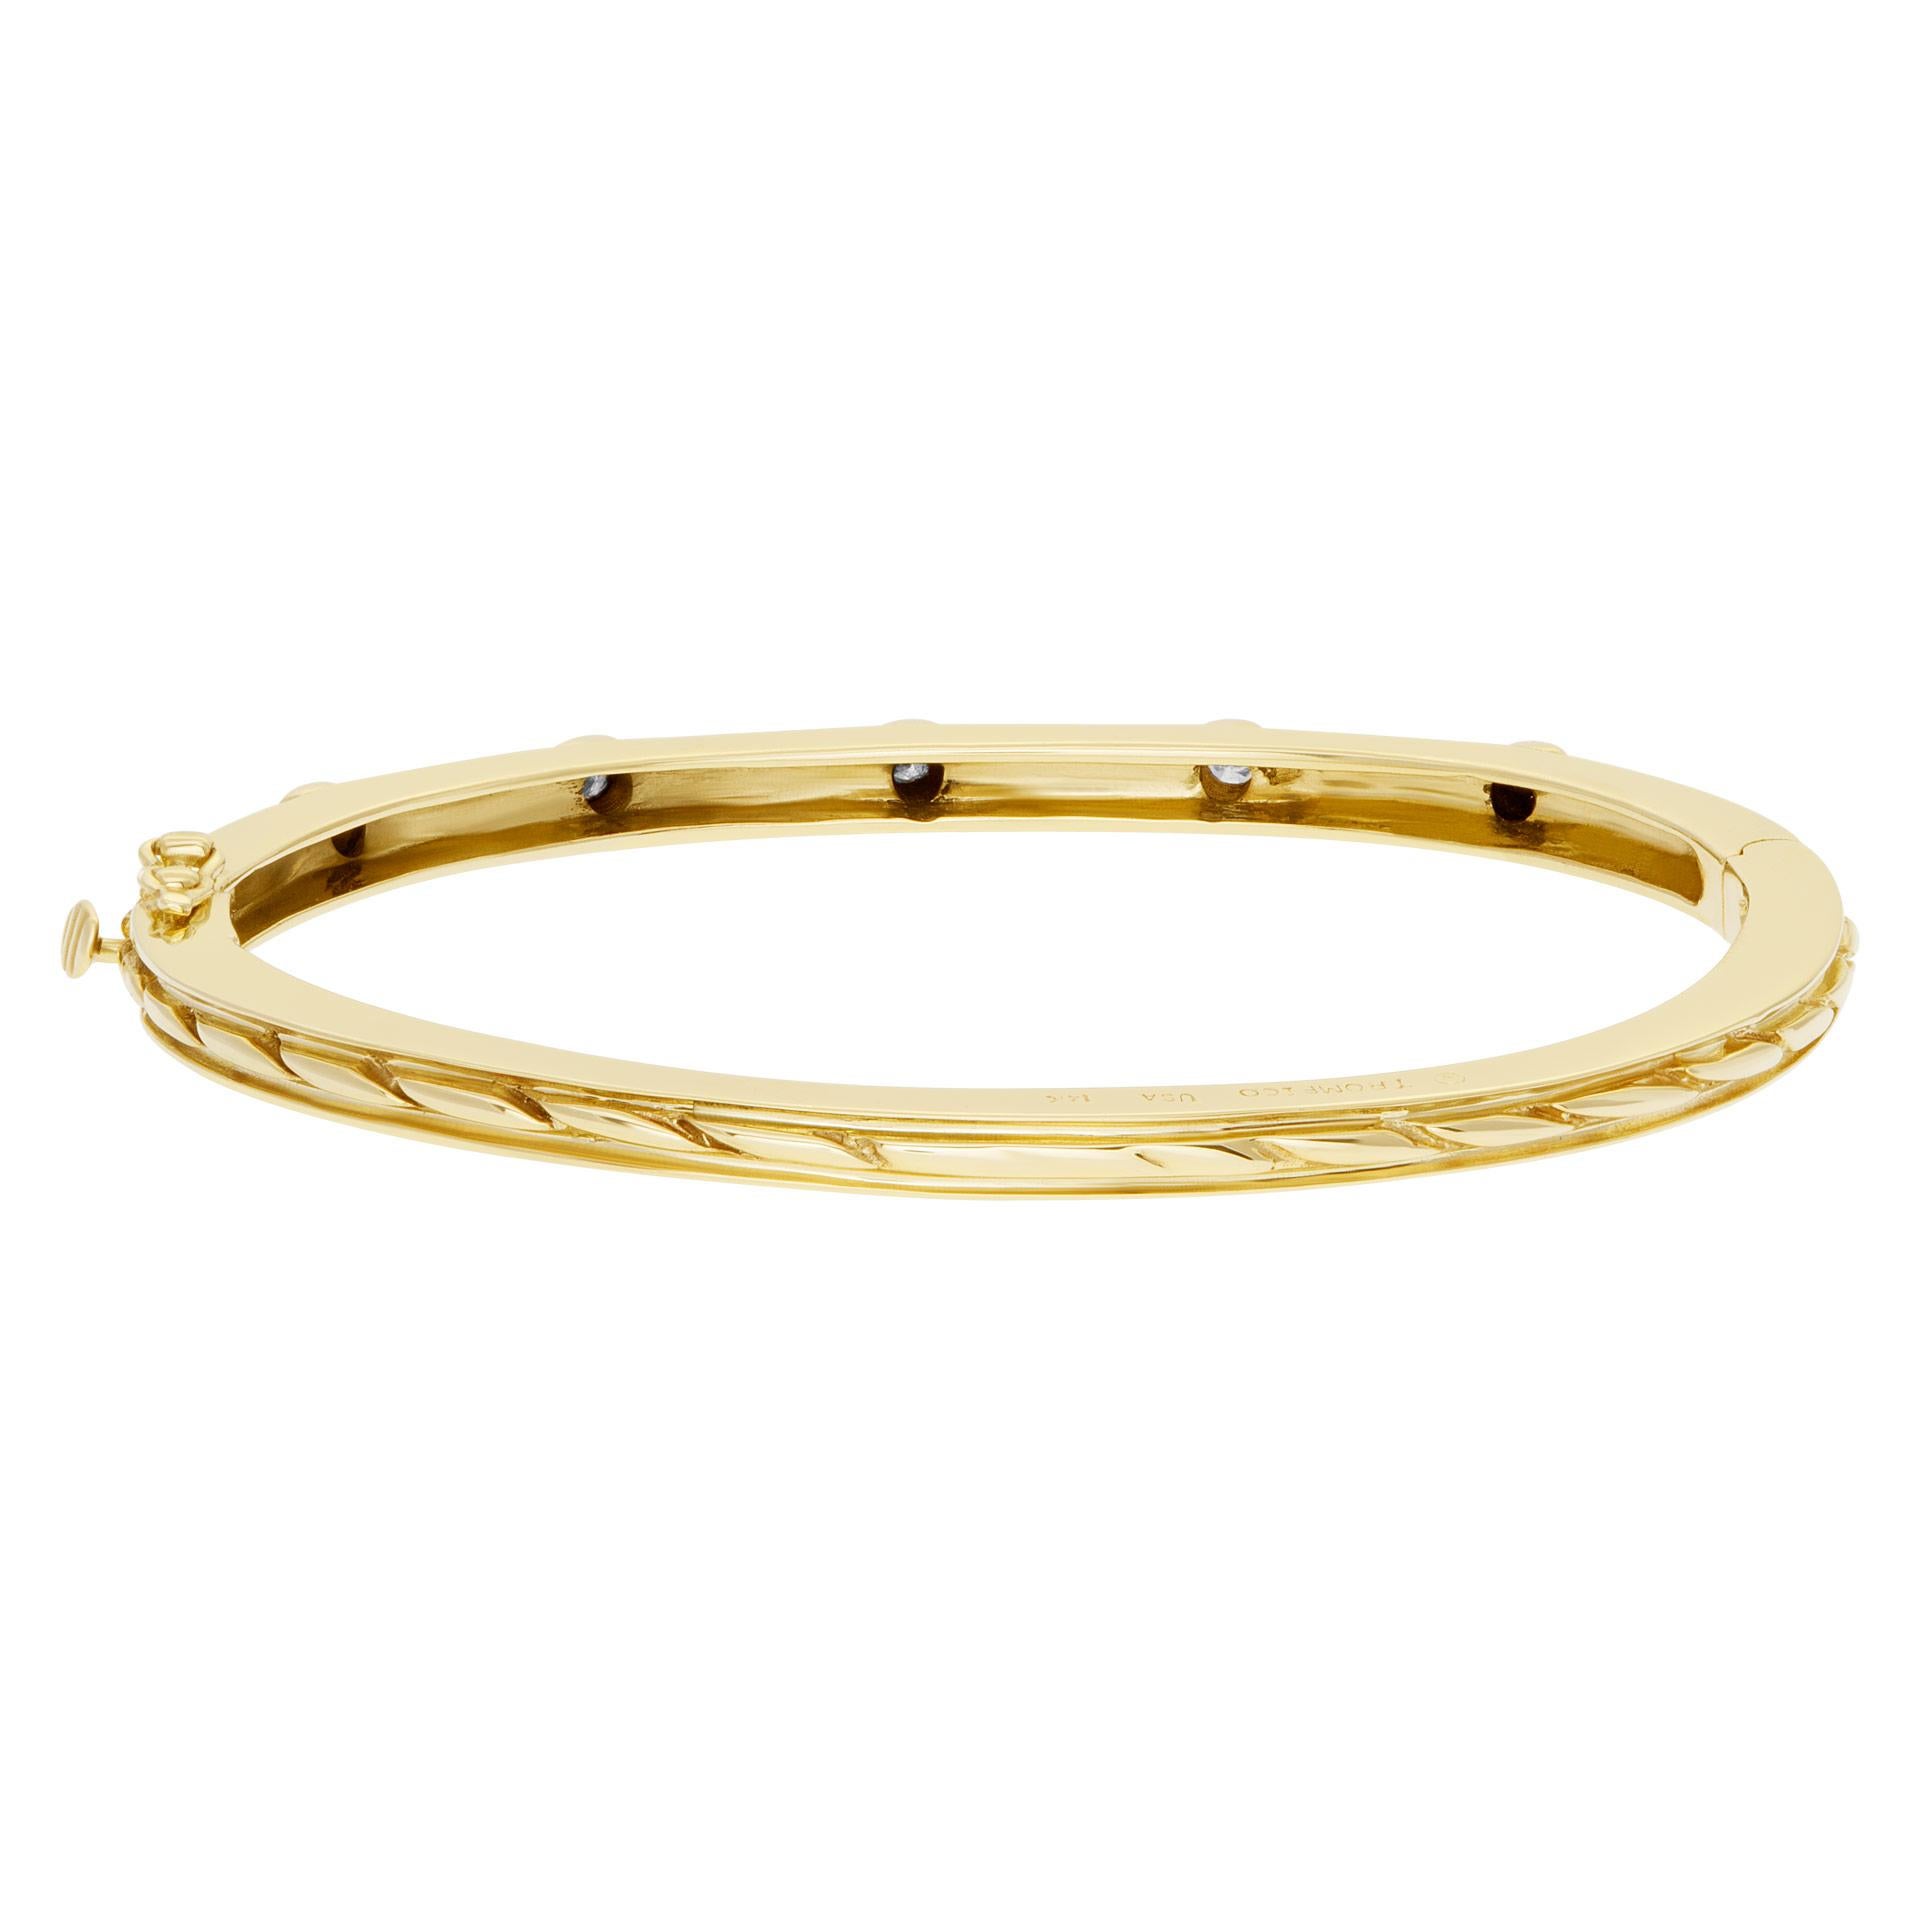 Bangle Bracelet with 5 Swirls in 14k Yellow Gold and Diamonds In Excellent Condition For Sale In Surfside, FL